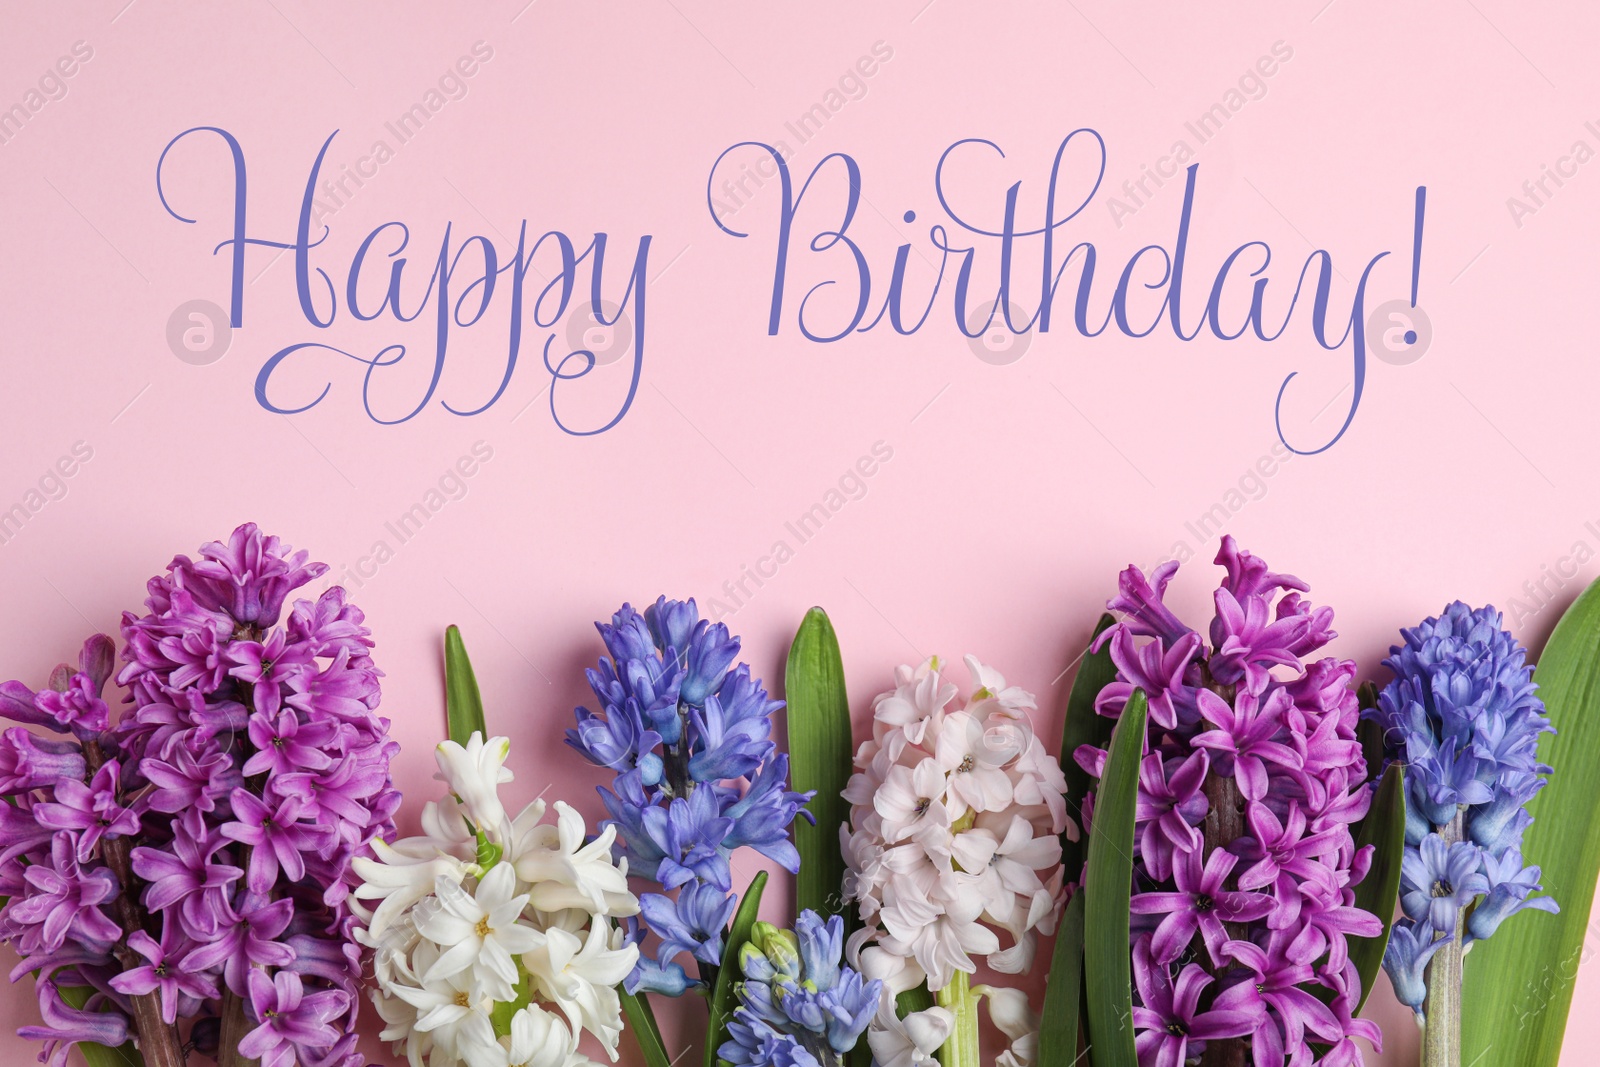 Image of Happy Birthday! Beautiful spring hyacinth flowers on pink background, flat lay